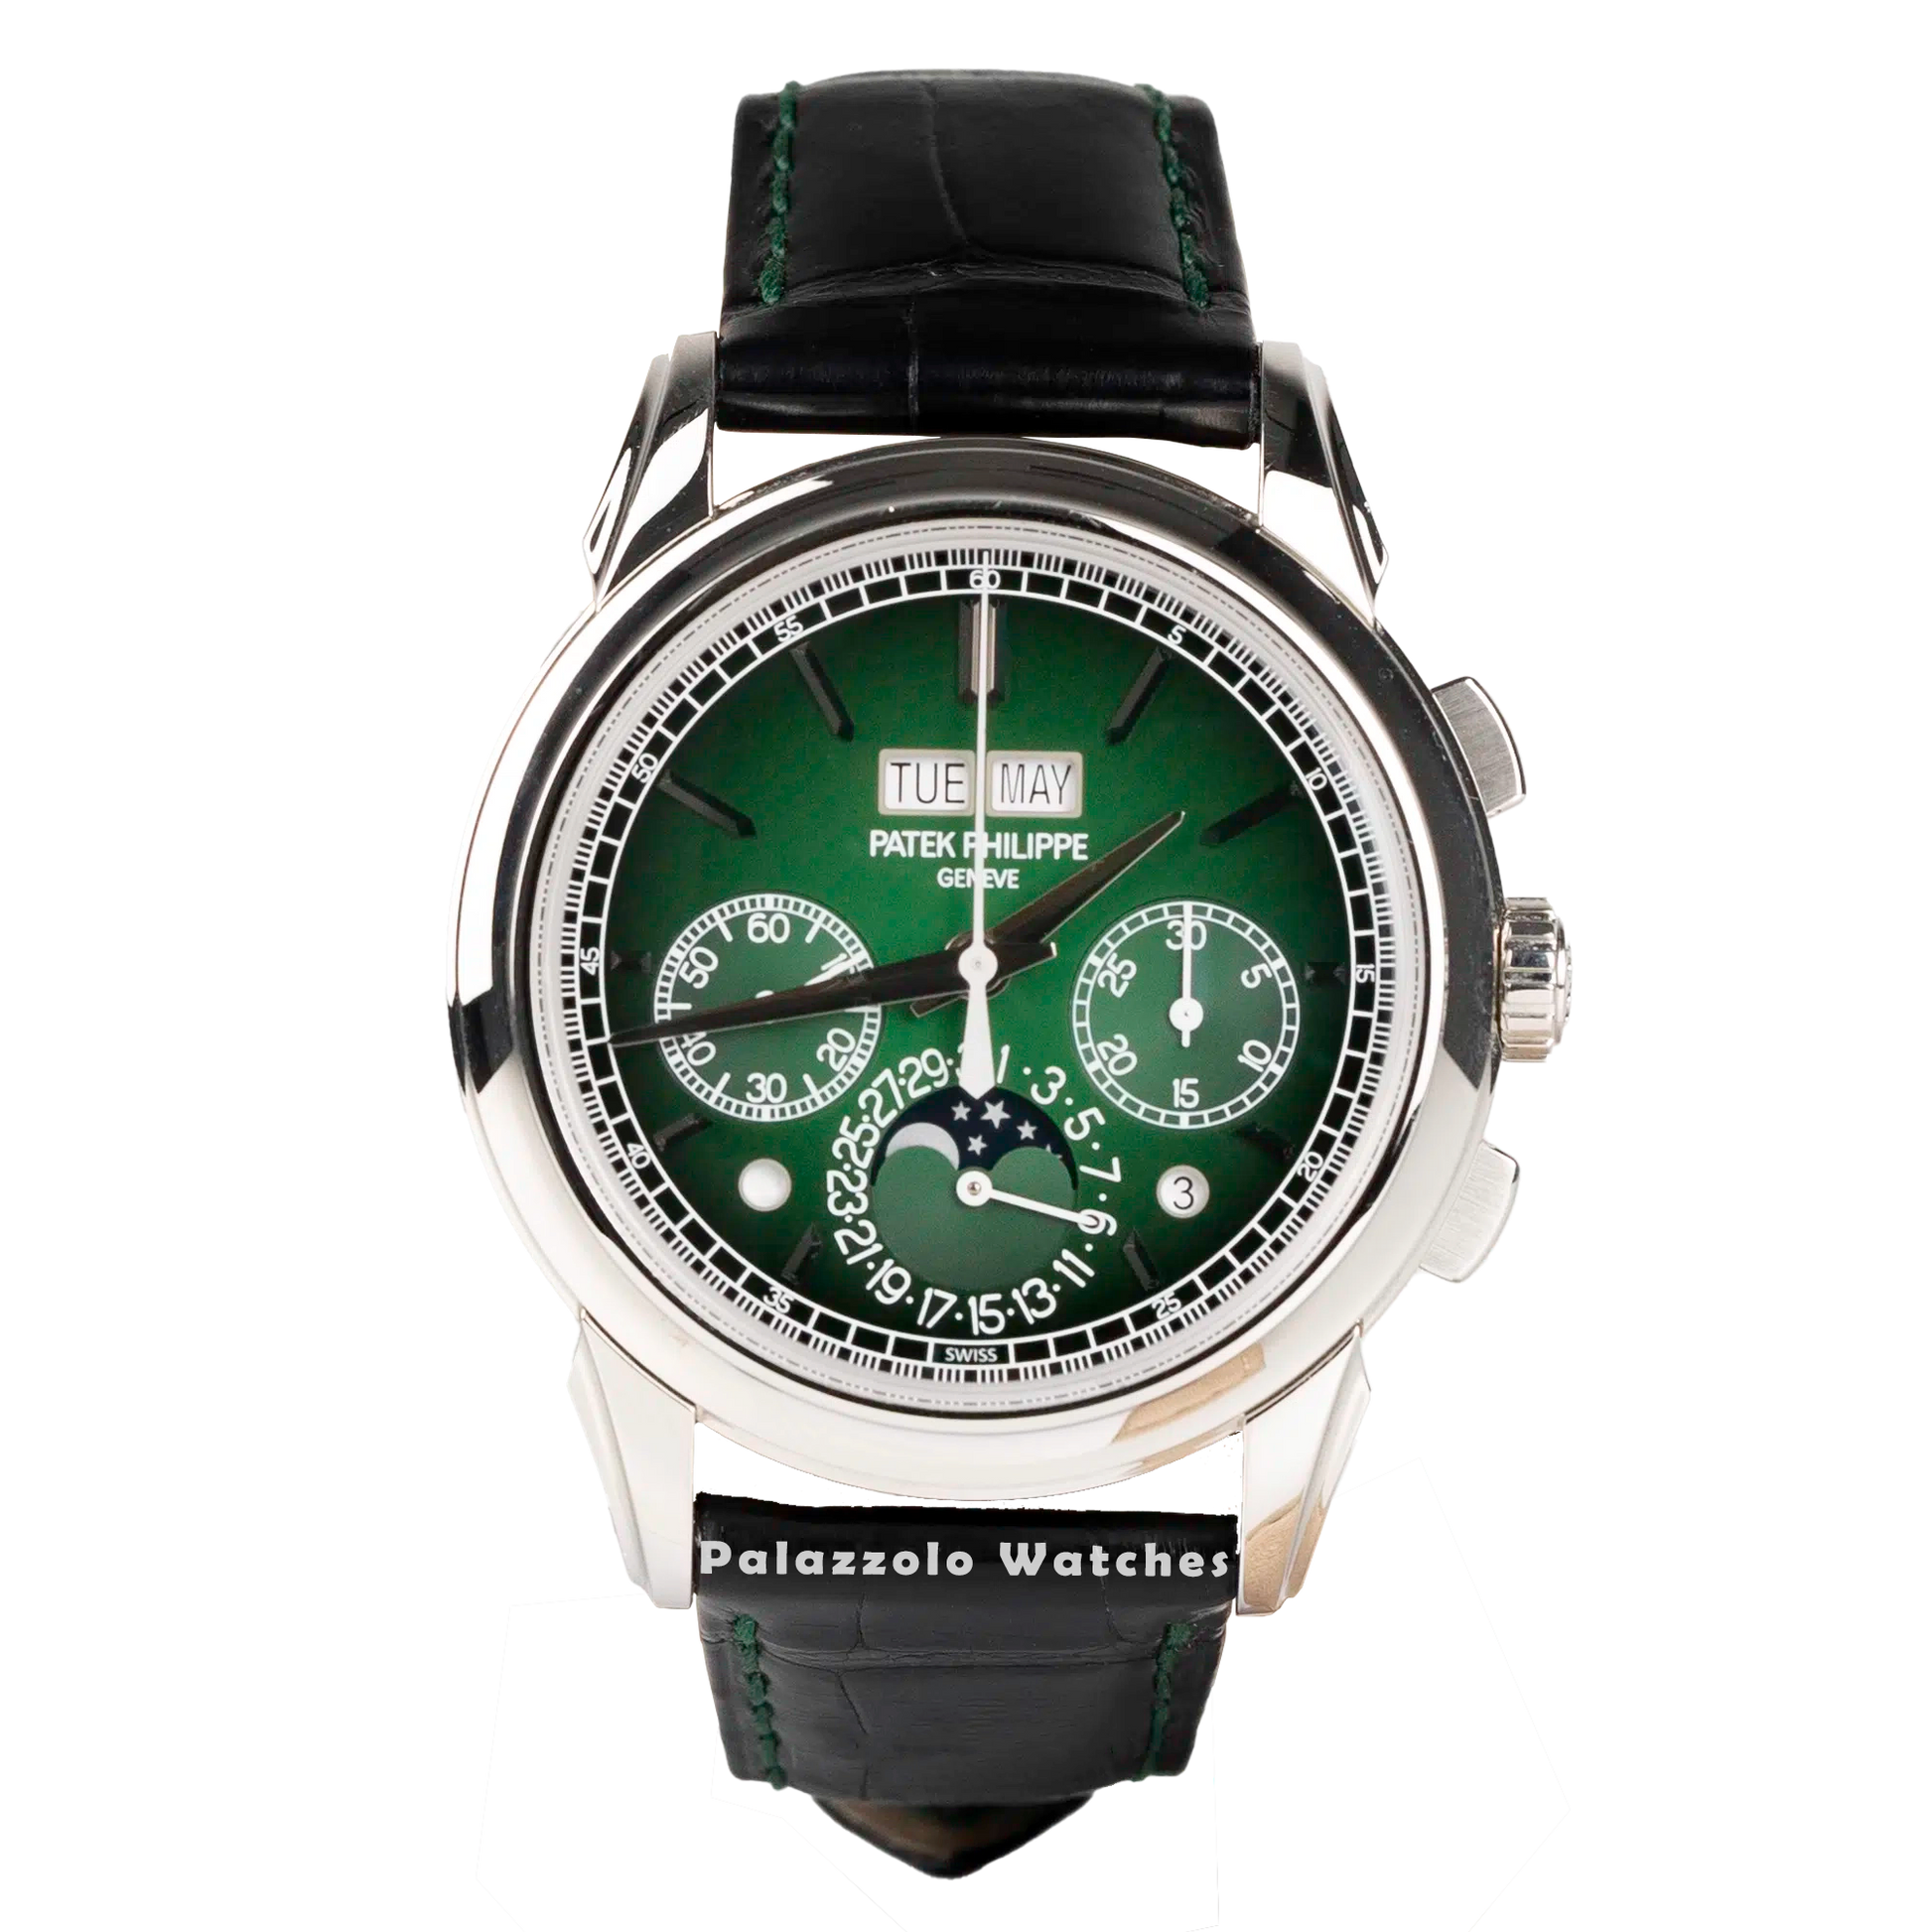 Patek Philippe Grand Complications 5270P Platinum with Green Dial - Palazzolo Watches